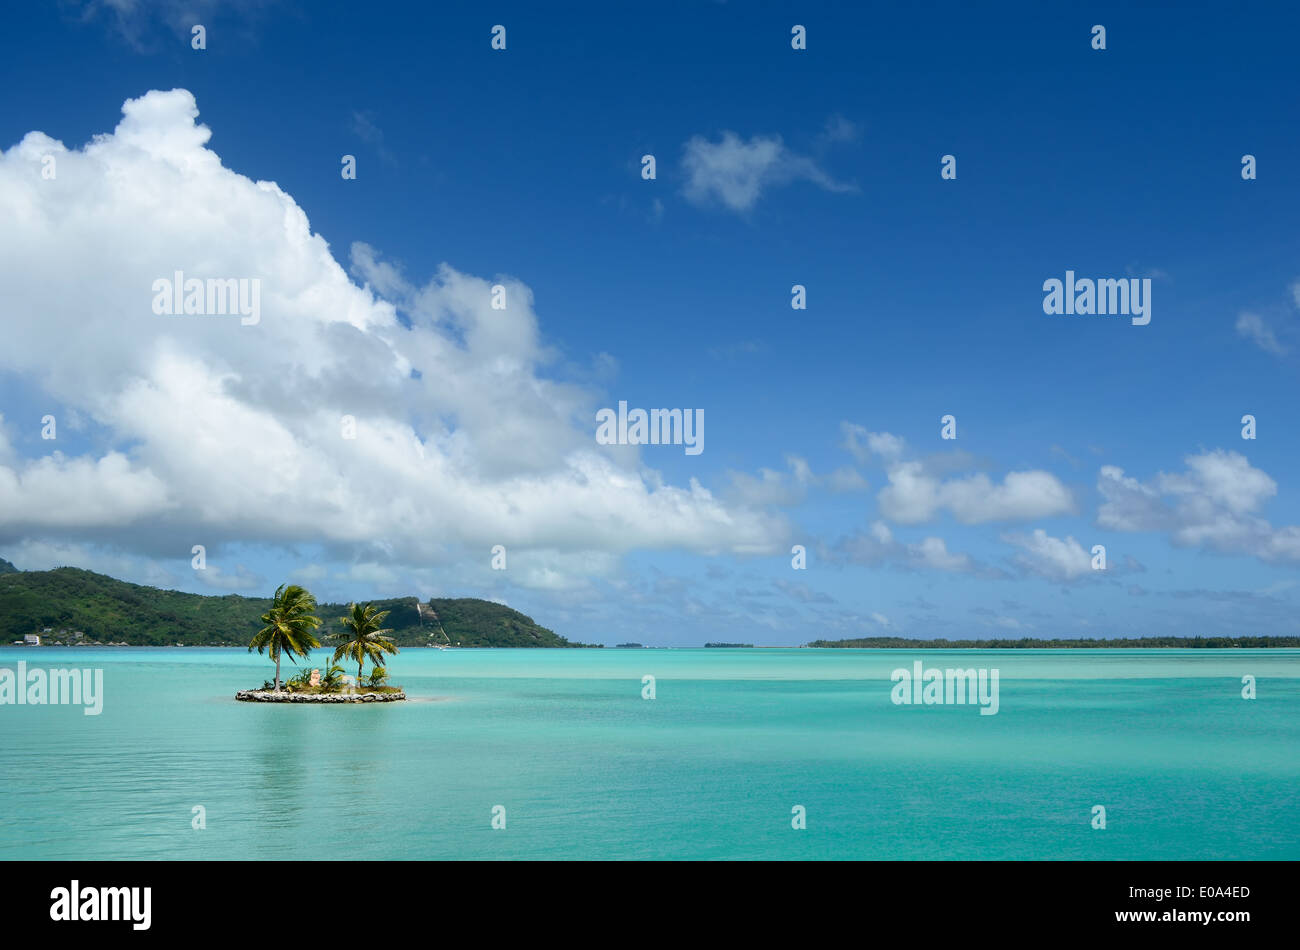 Small island with coconut palm trees in the clear water of the blue lagoon of Bora Bora near Tahiti in French Polynesia. Stock Photo